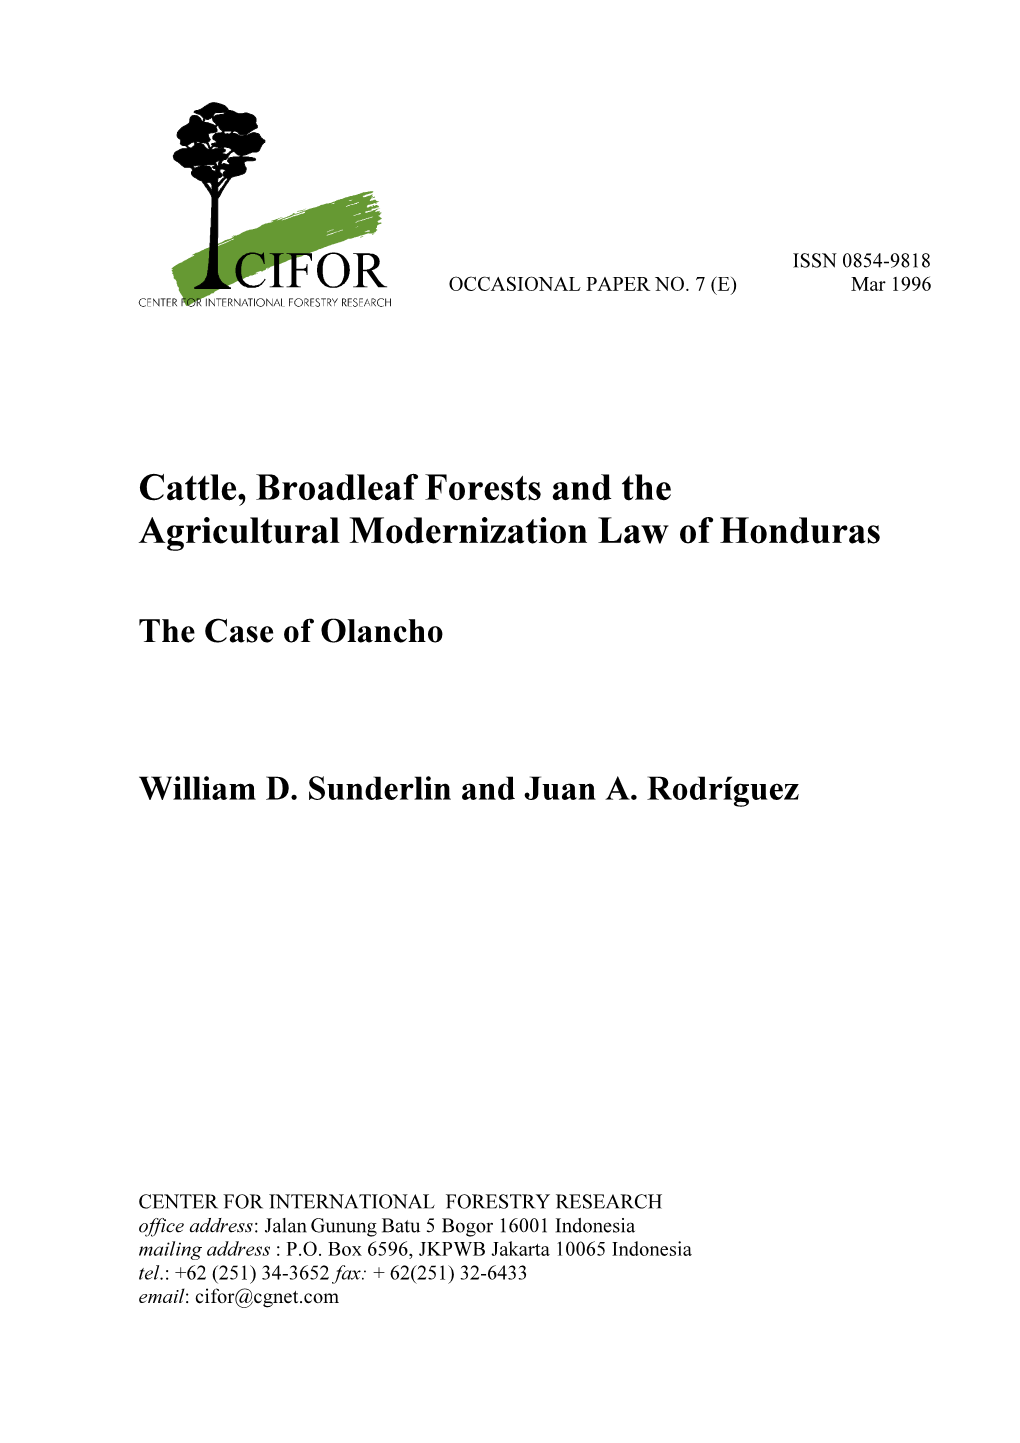 Cattle, Broadleaf Forest and the Agricultural Modernization Law Of